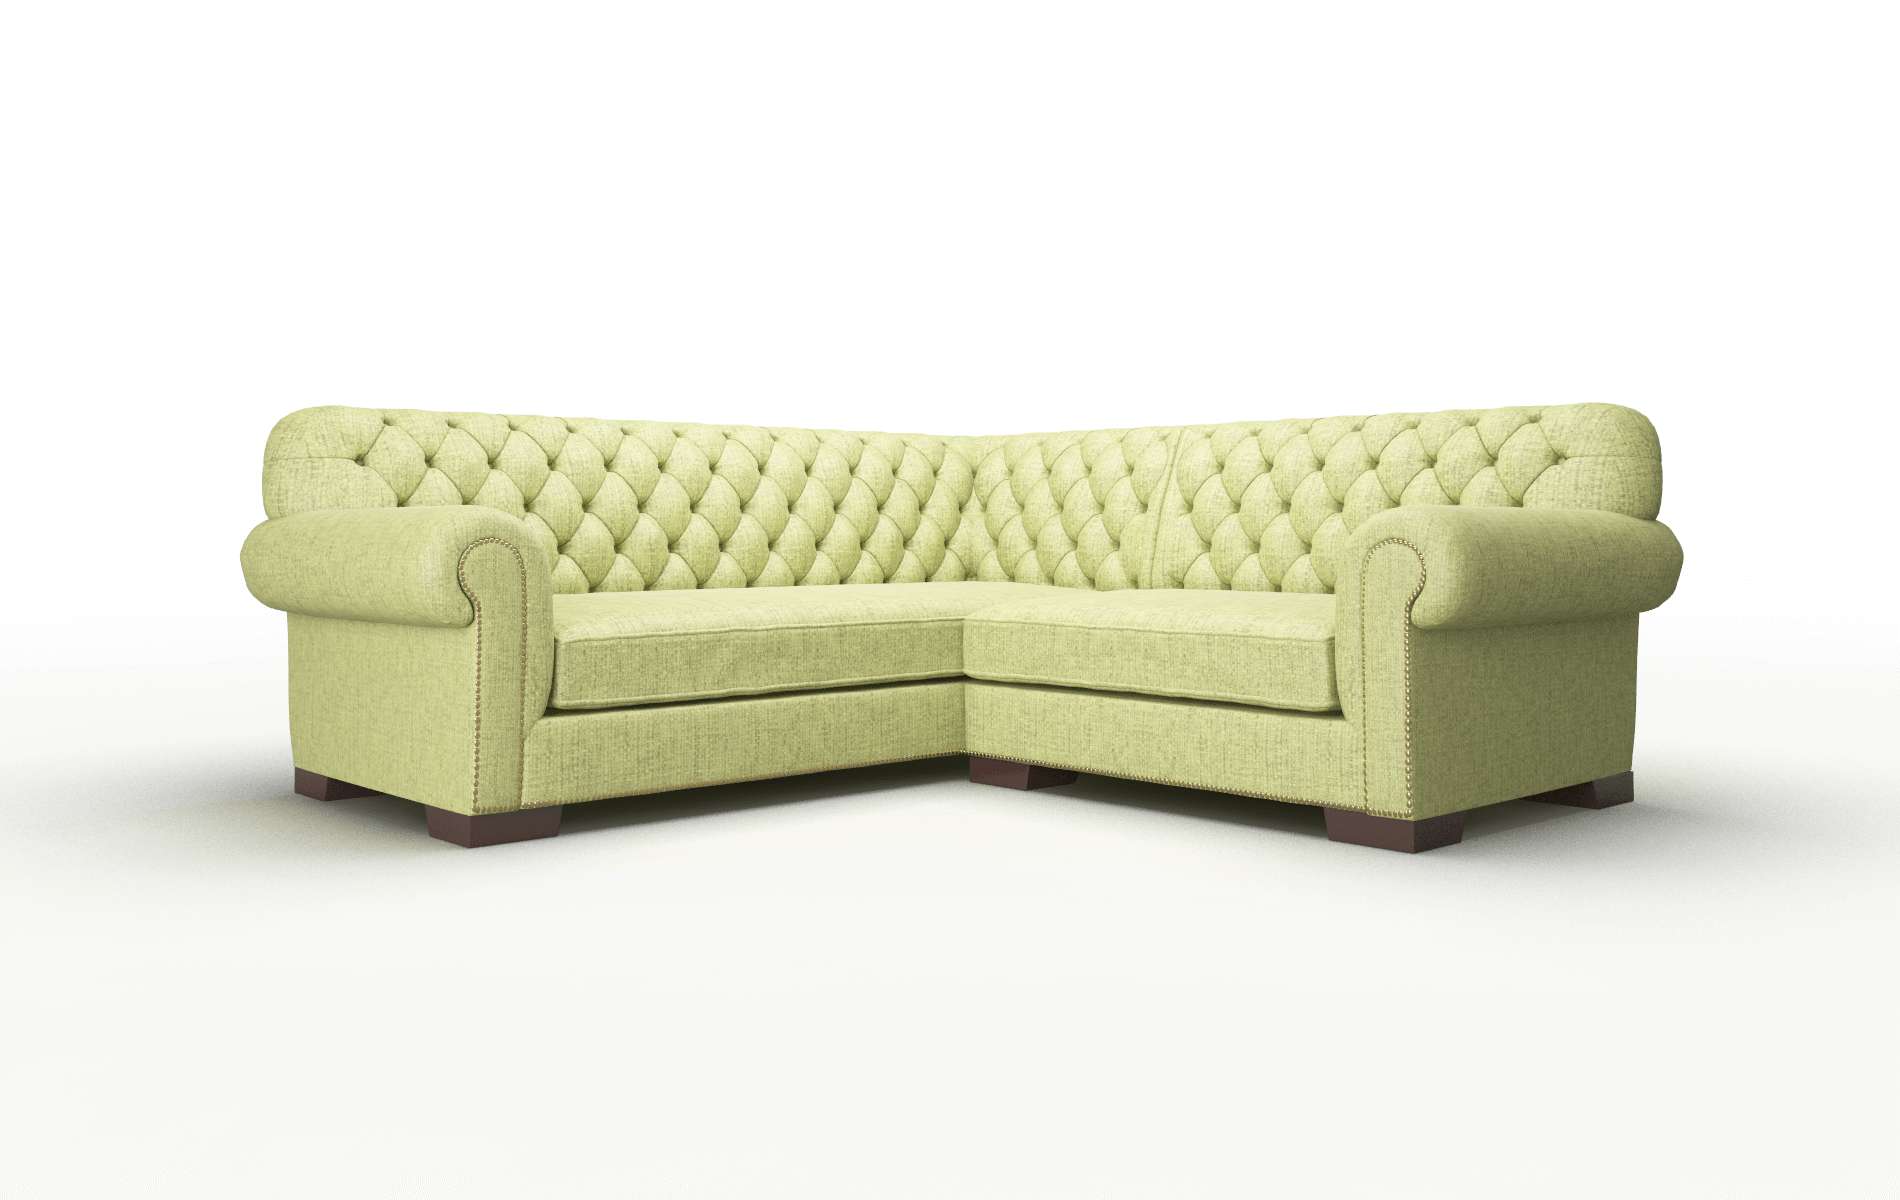 Chester Notion Appletini Sectional espresso legs 1